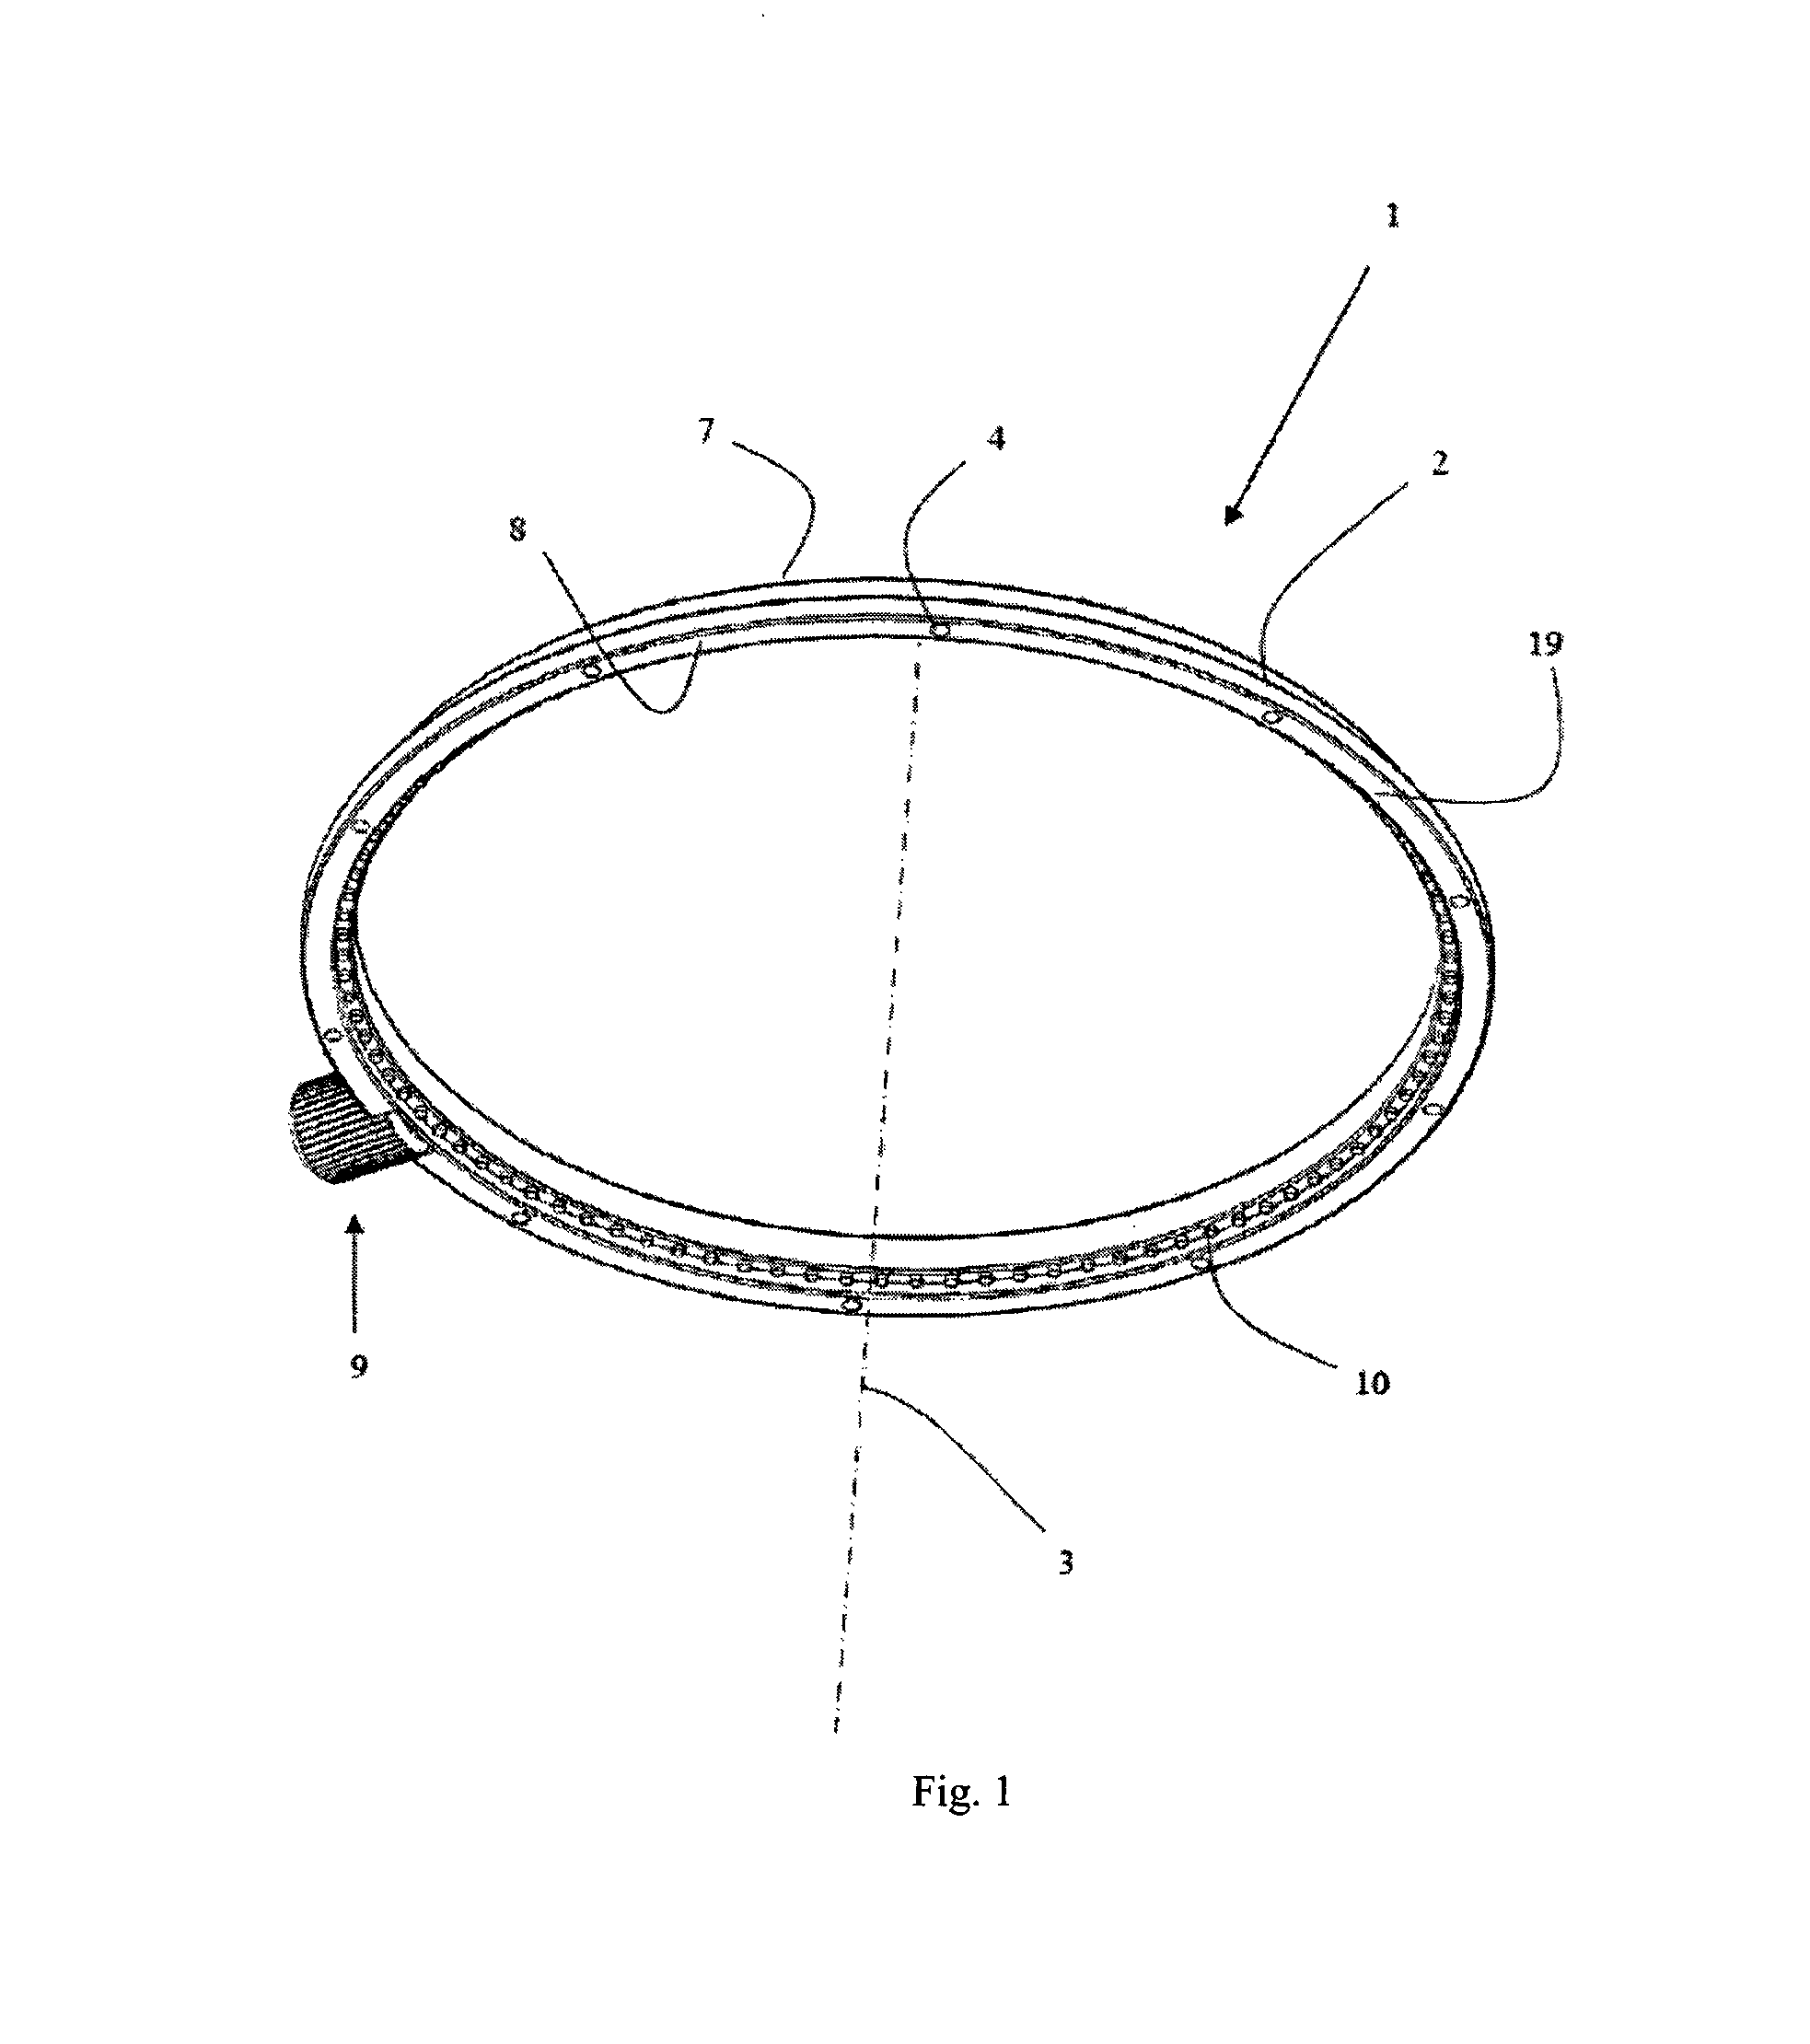 Tension adjustment hoop for a membrane of a musical instrument